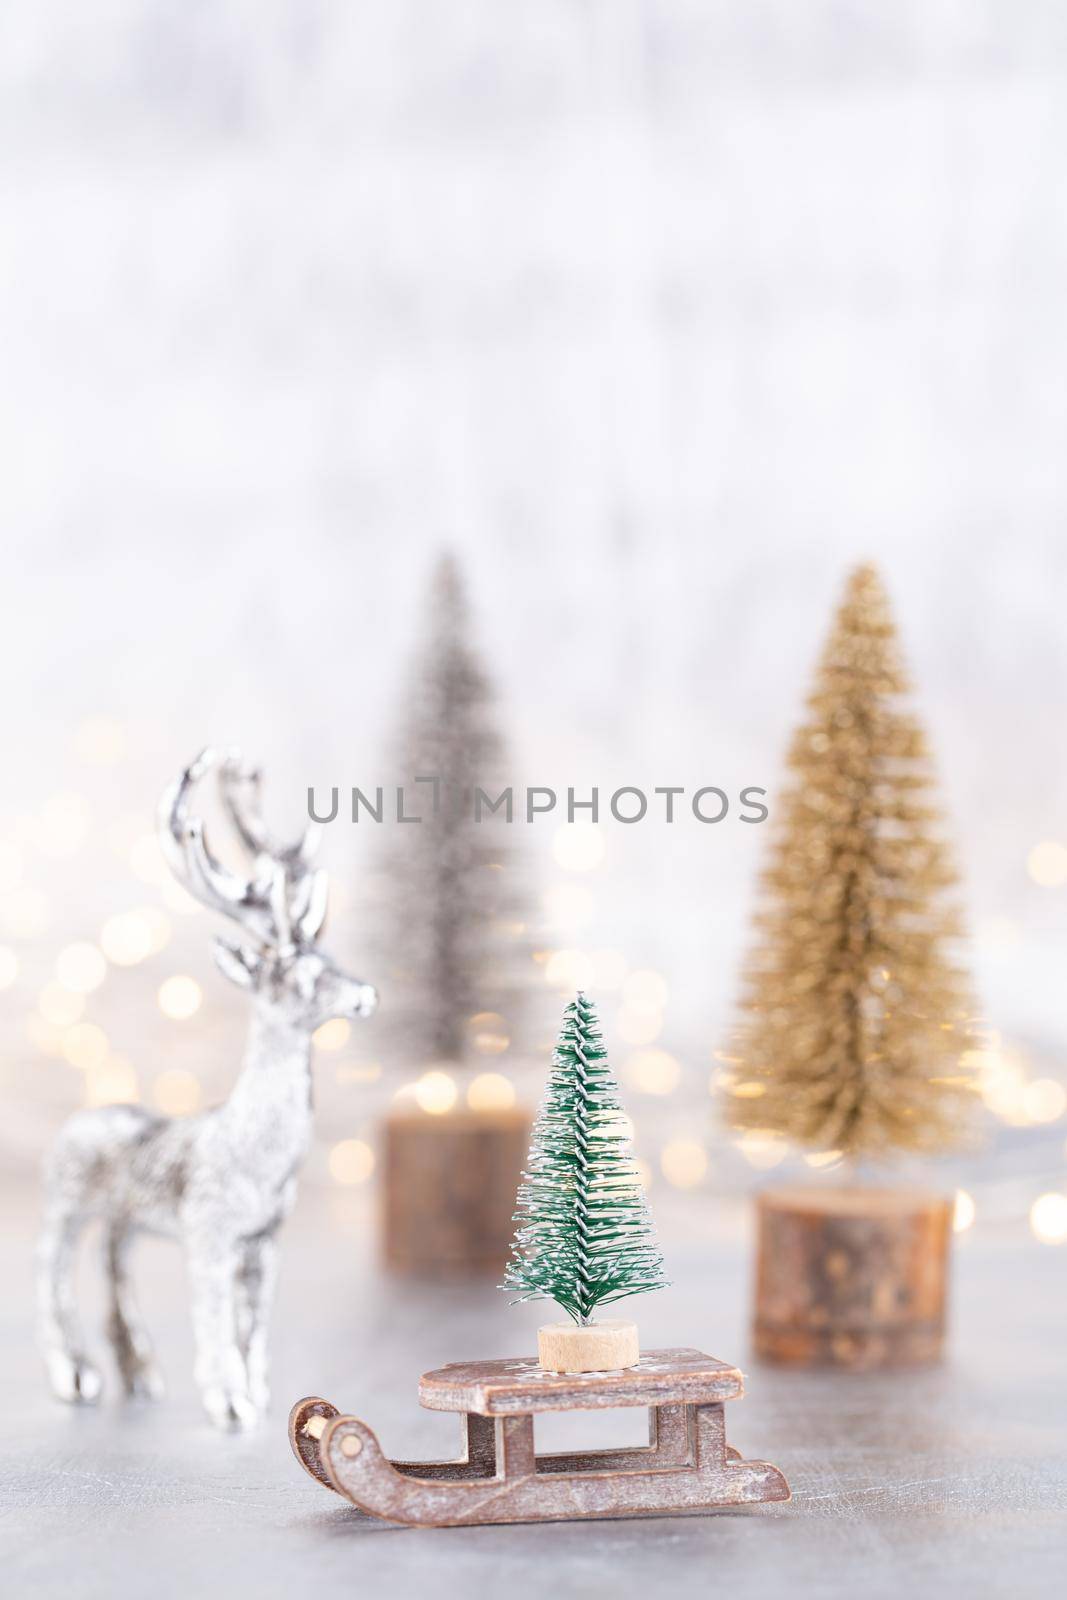 Christmas tree on silver, bokeh background.